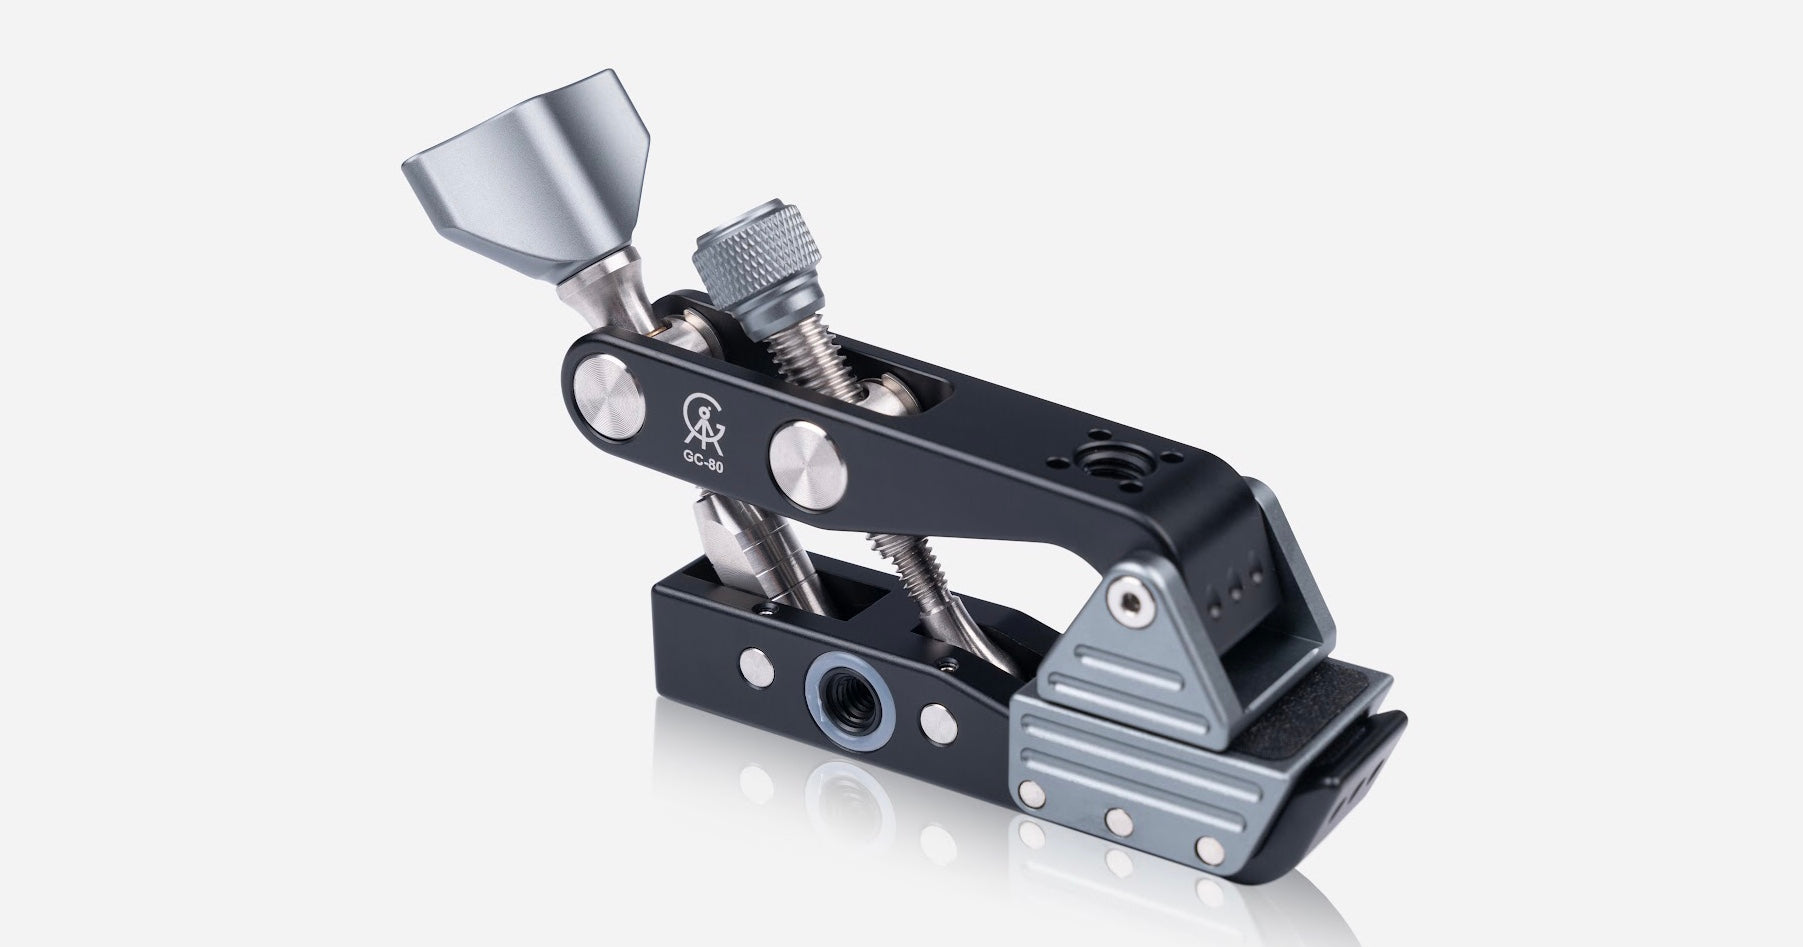 Product Launch - The Pro Clamp